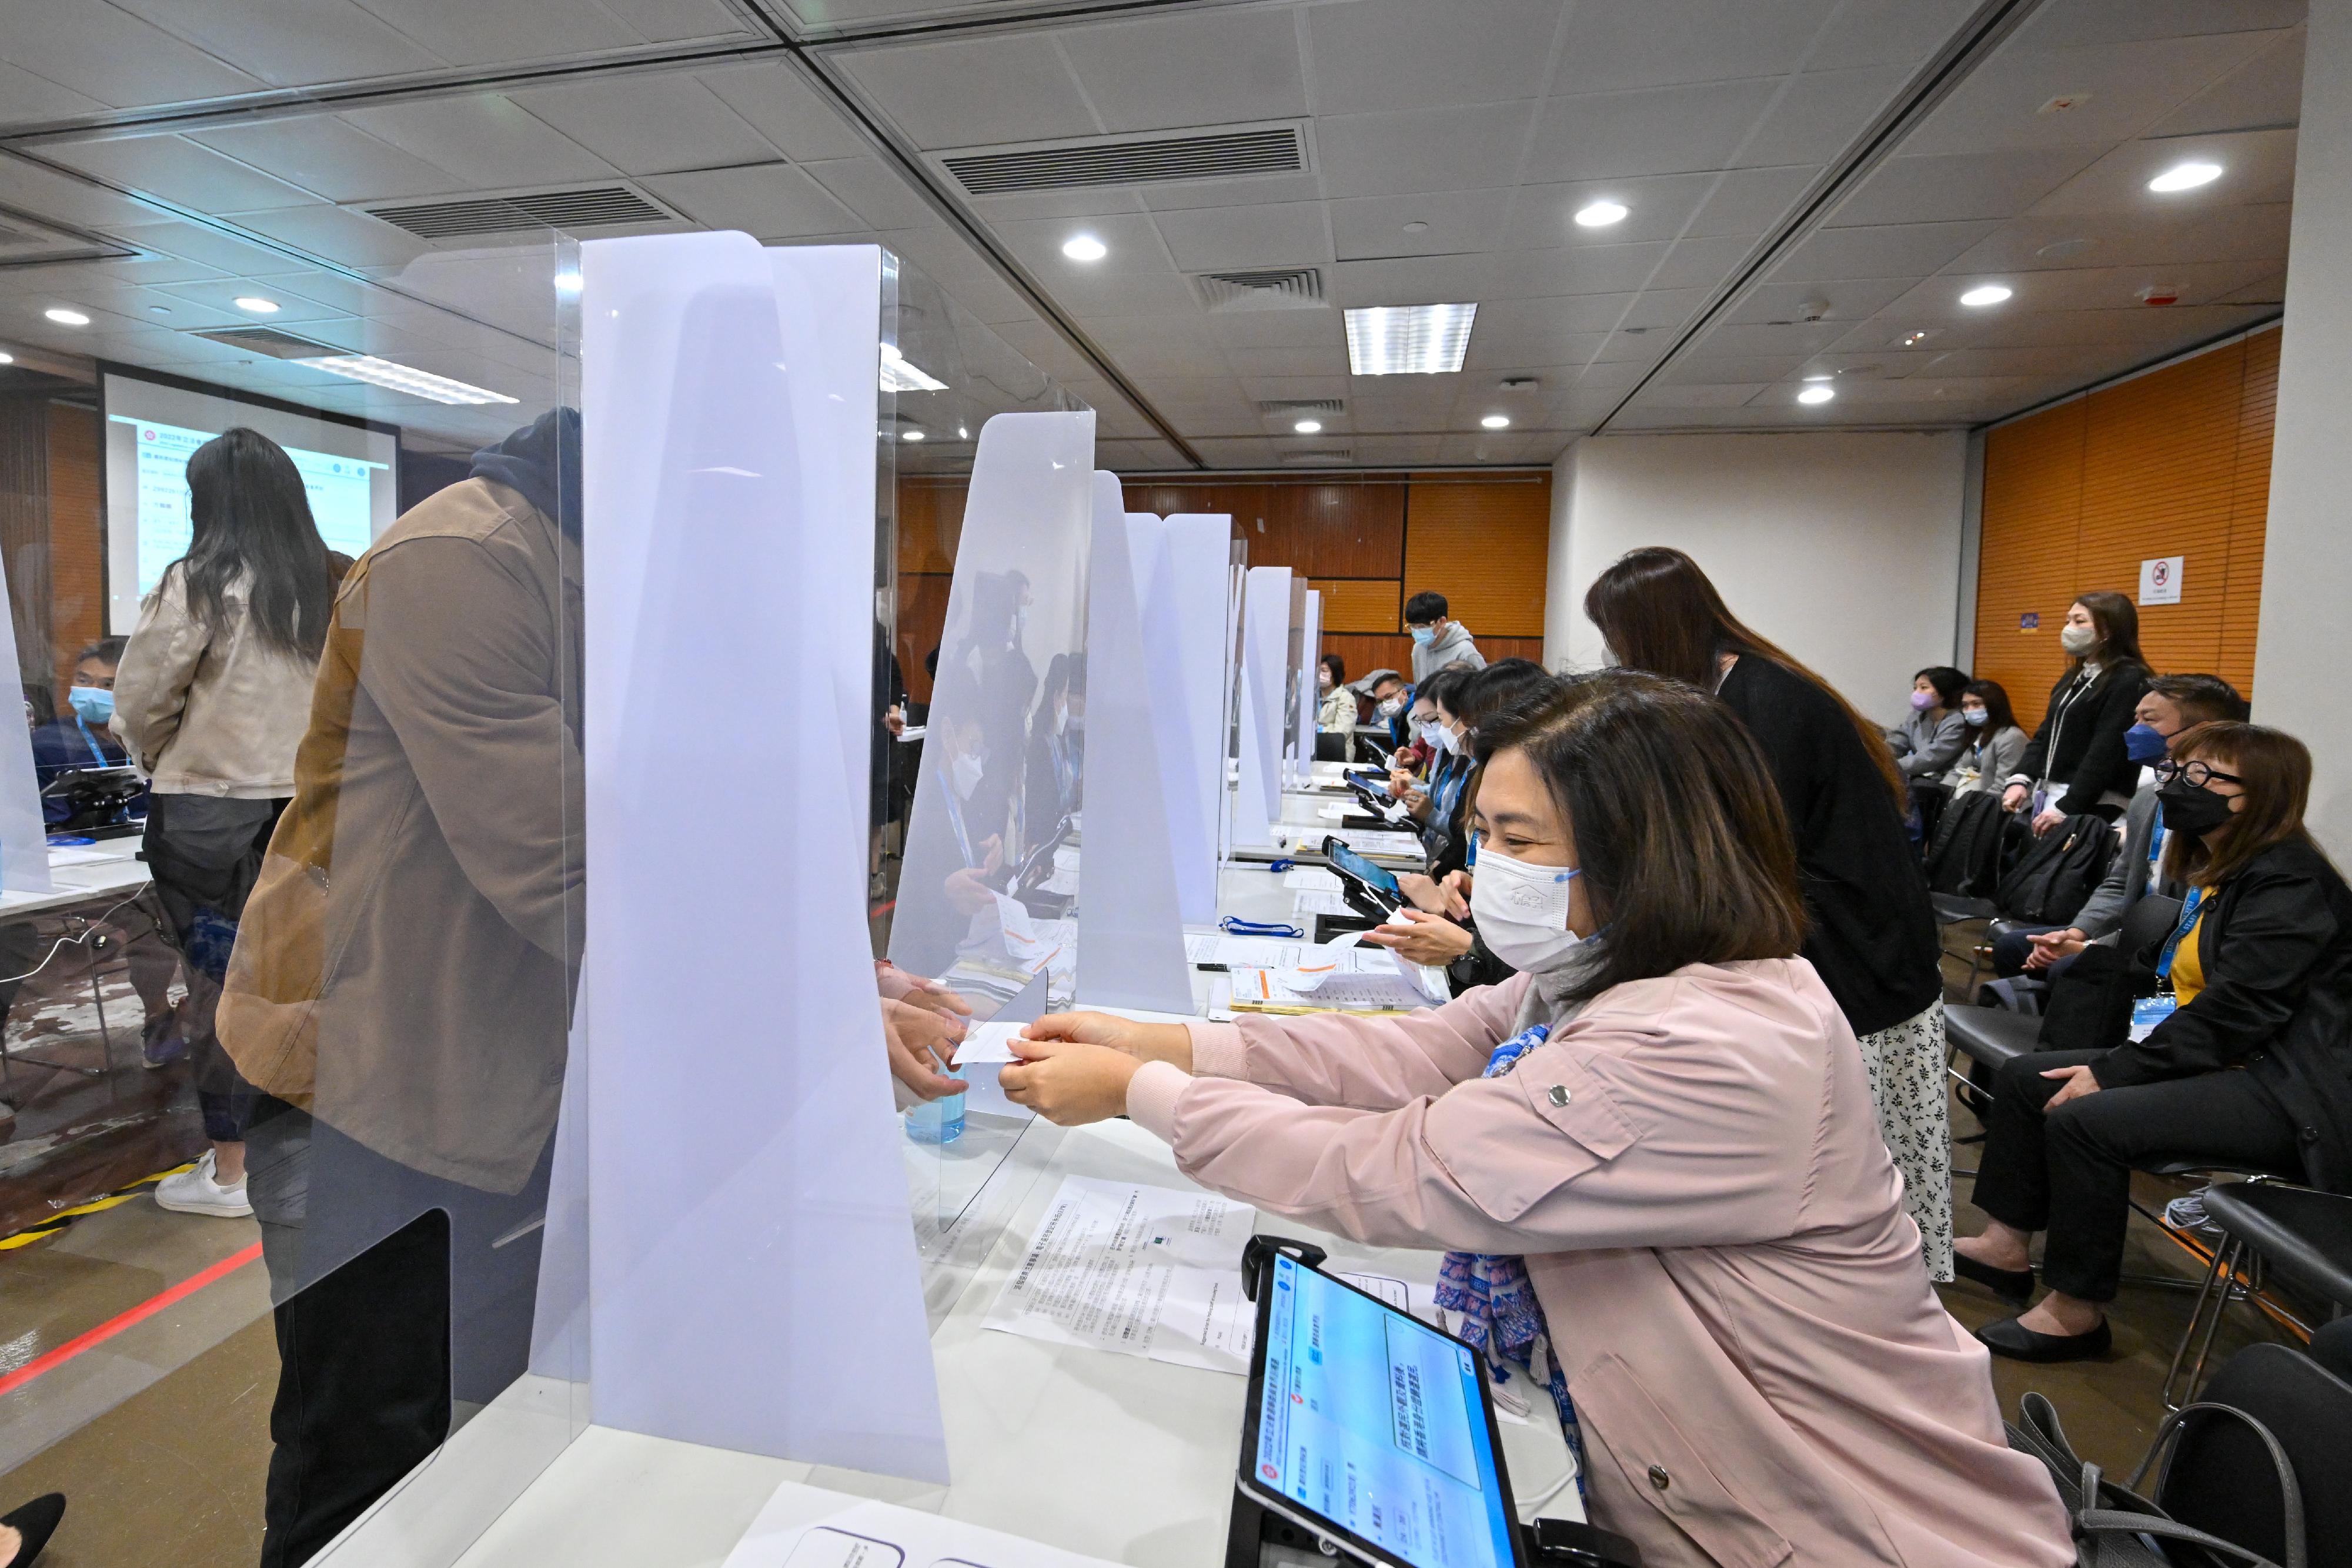 The Registration and Electoral Office conducts a series of online and hands-on training sessions for polling staff of the 2022 Legislative Council Election Committee constituency by-election. Photo shows polling staff during hands-on training on issuance of a ballot paper with the use of the Electronic Poll Register system.